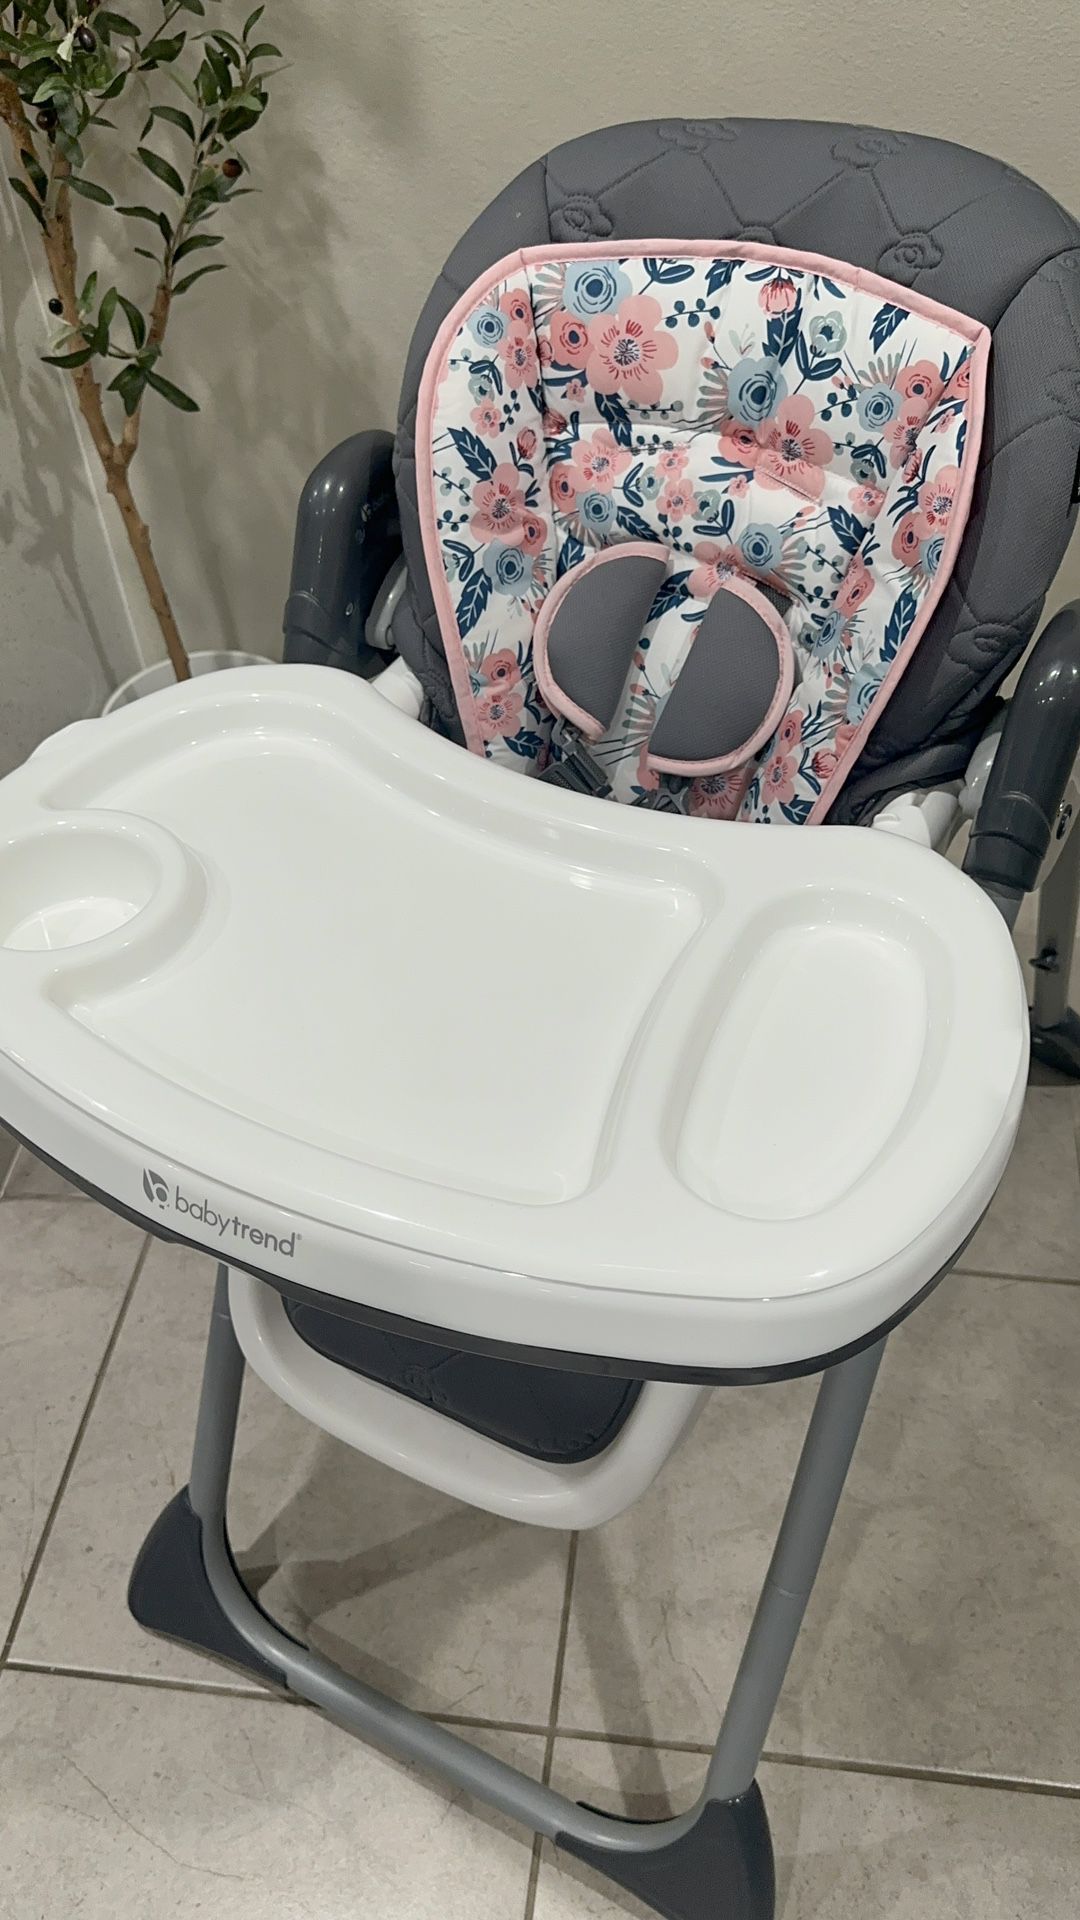 Baby High Chair - Baby Trend Tot Spot